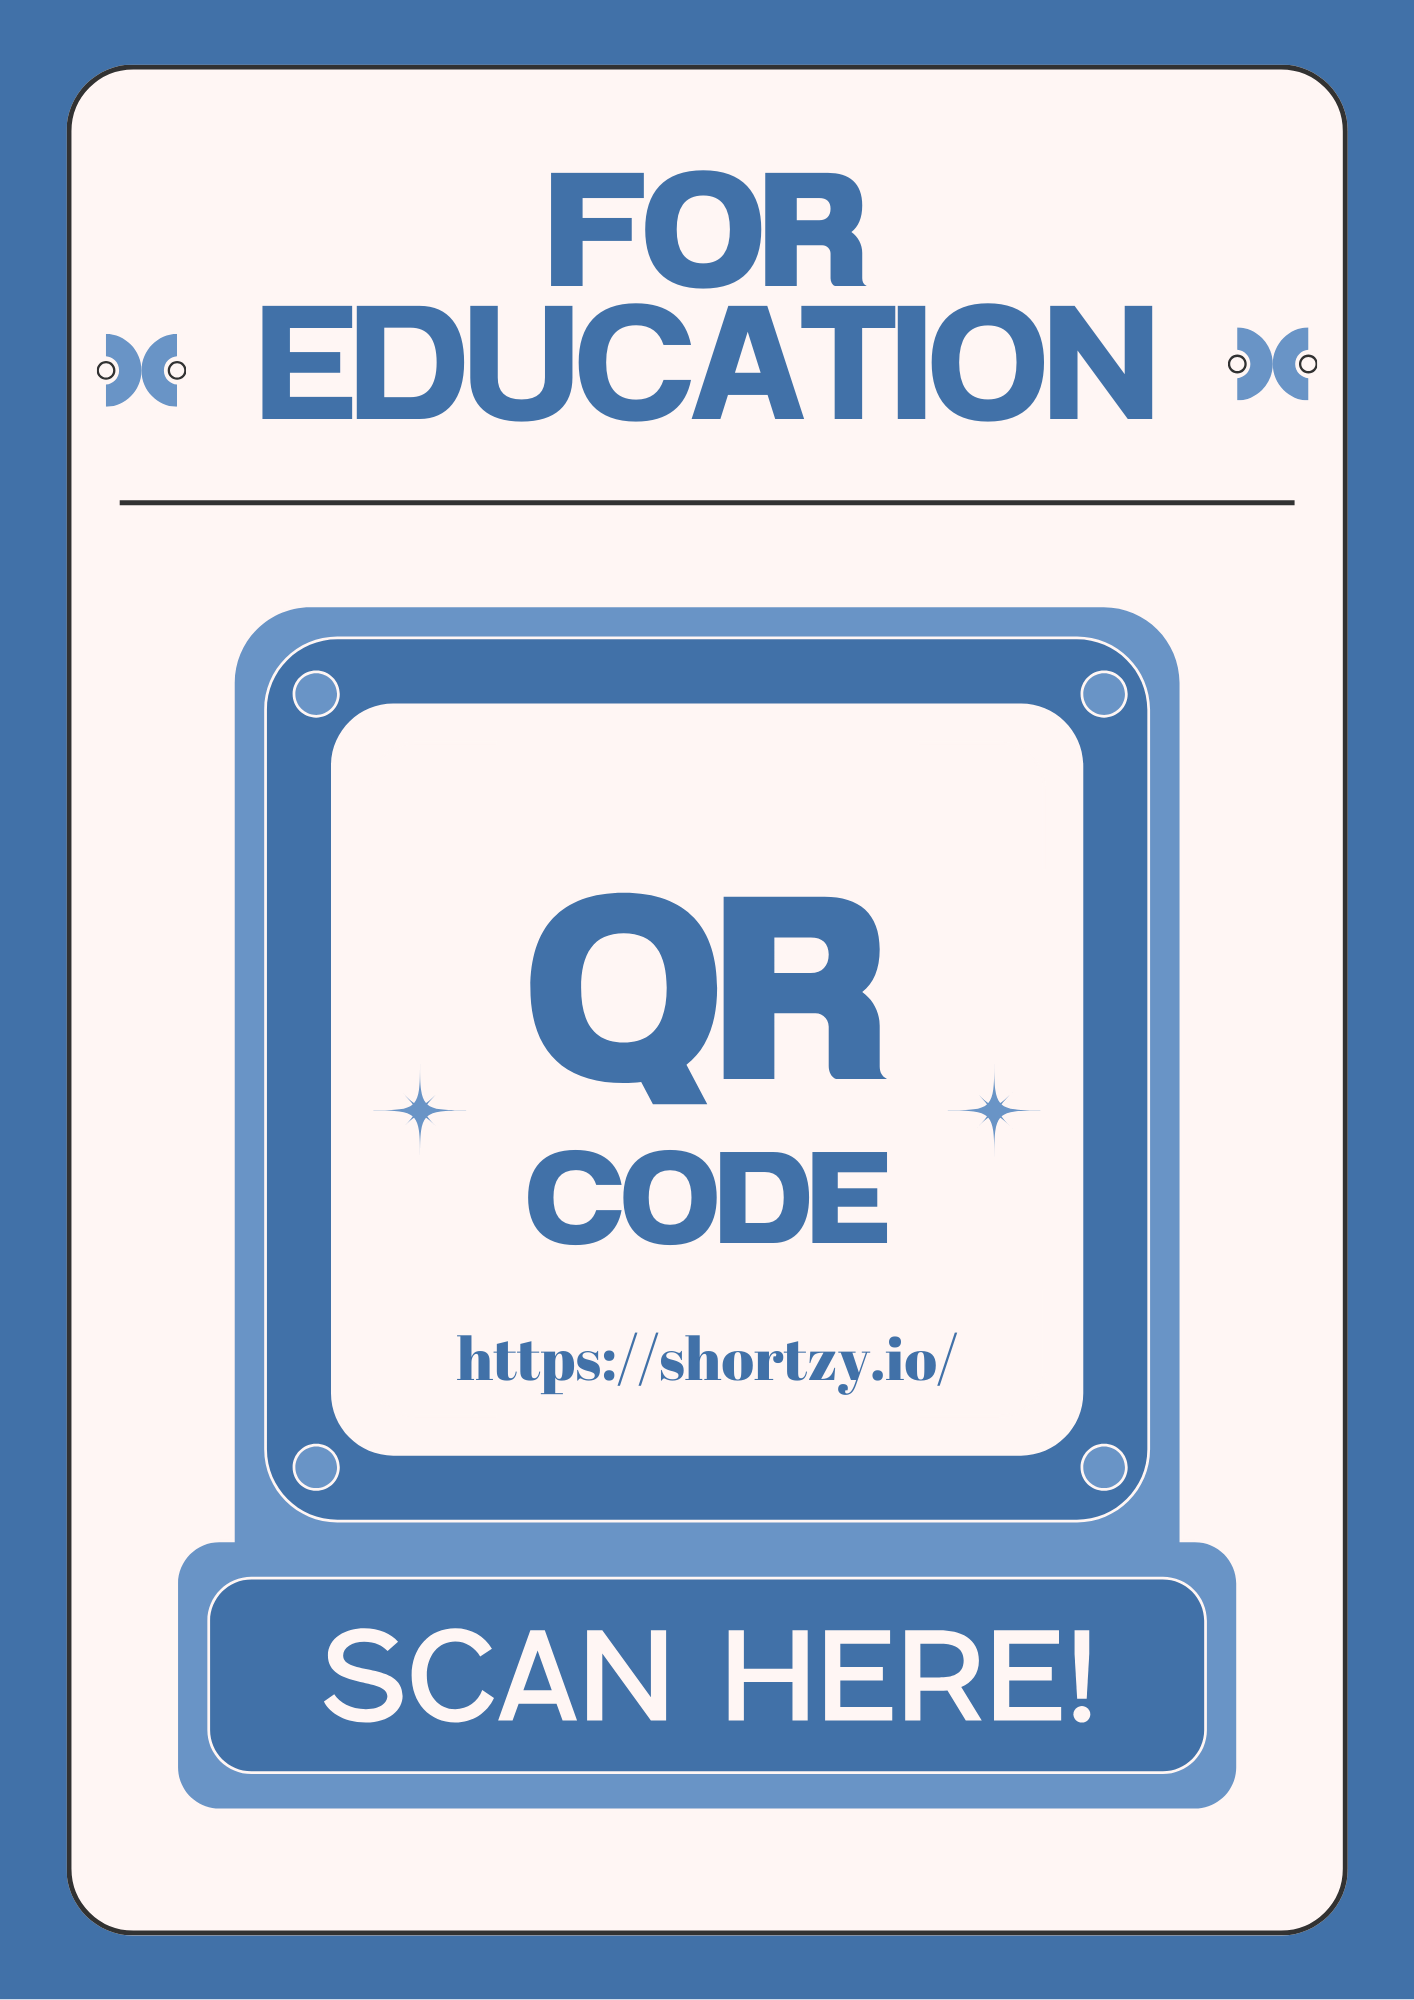 What is the use of QR code in education?